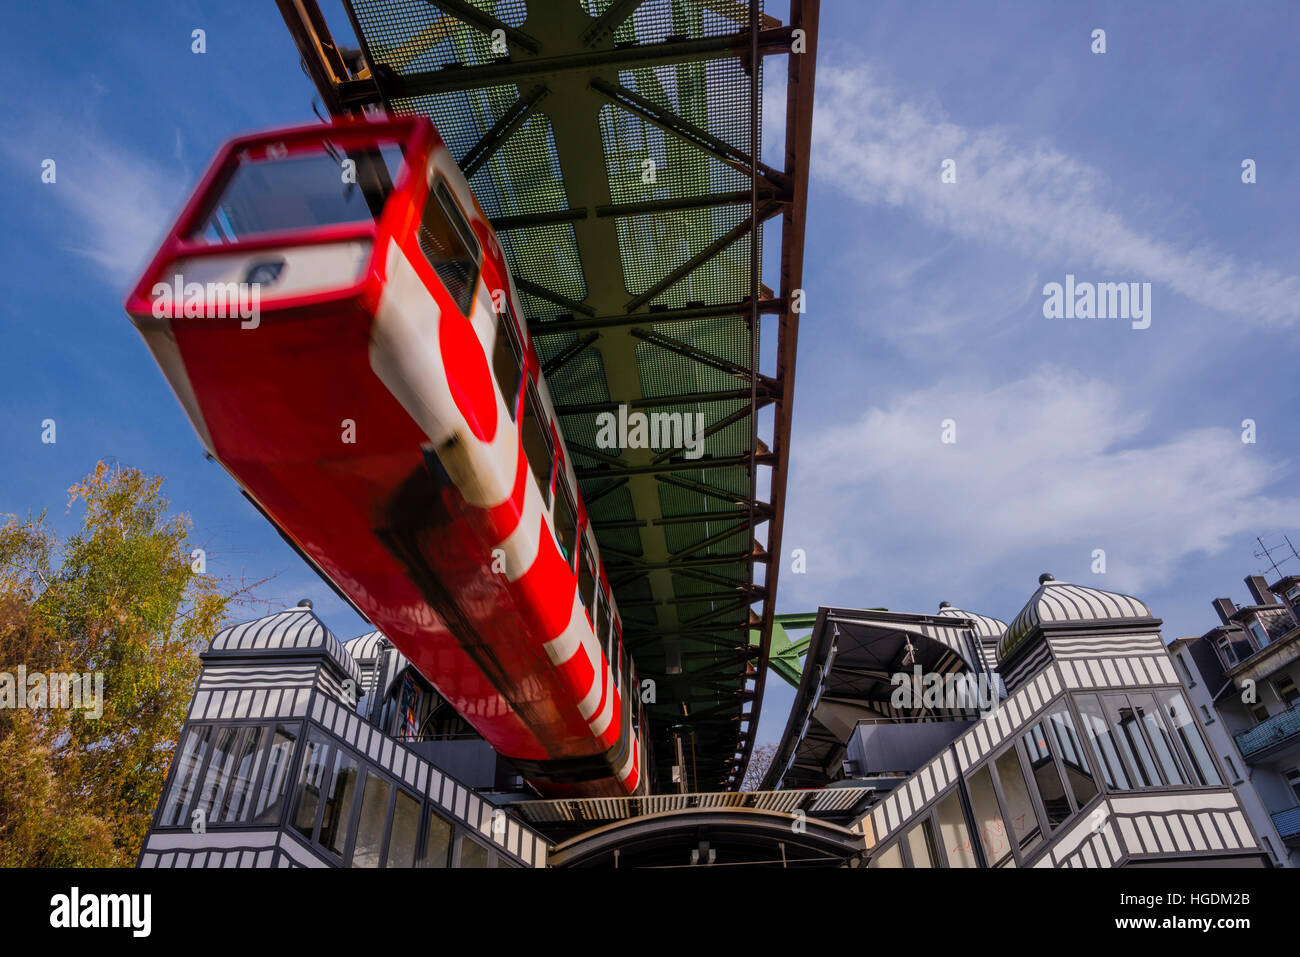 Wuppertal suspension railway, elevated track, Wuppertal, Bergisches Land, North Rhine-Westphalia, Germany Stock Photo